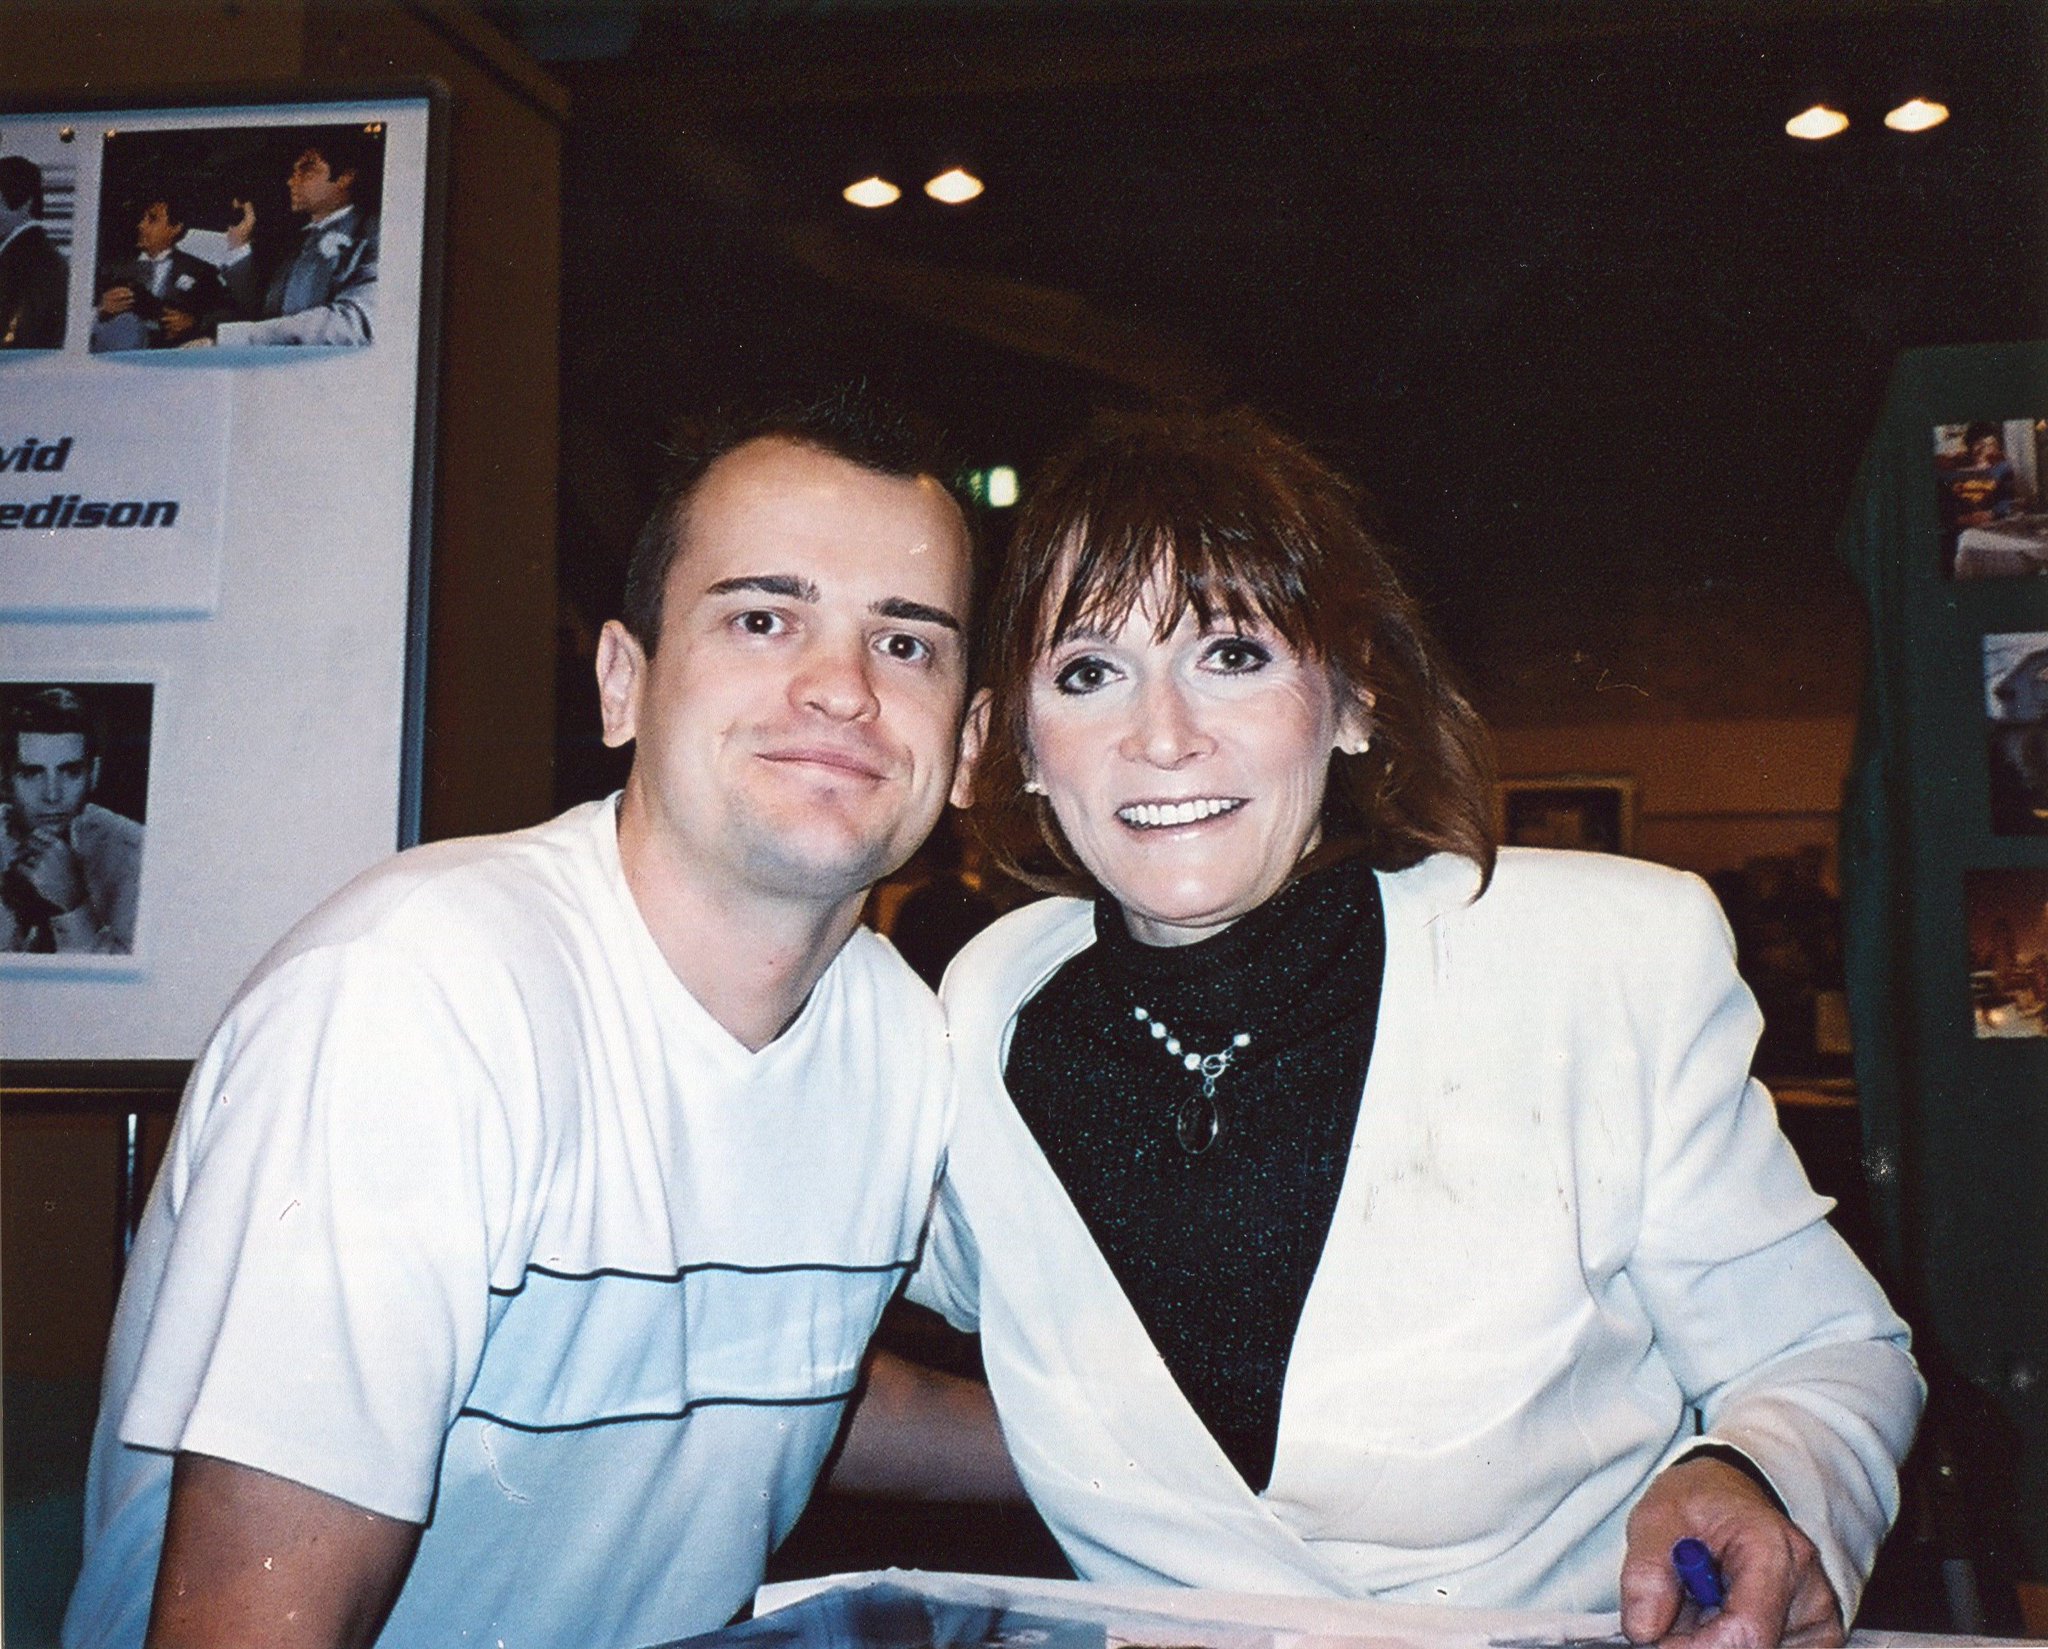 Happy Birthday Margot Kidder, lucky to meet you when you were in the UK, she was so lovely RIP. 